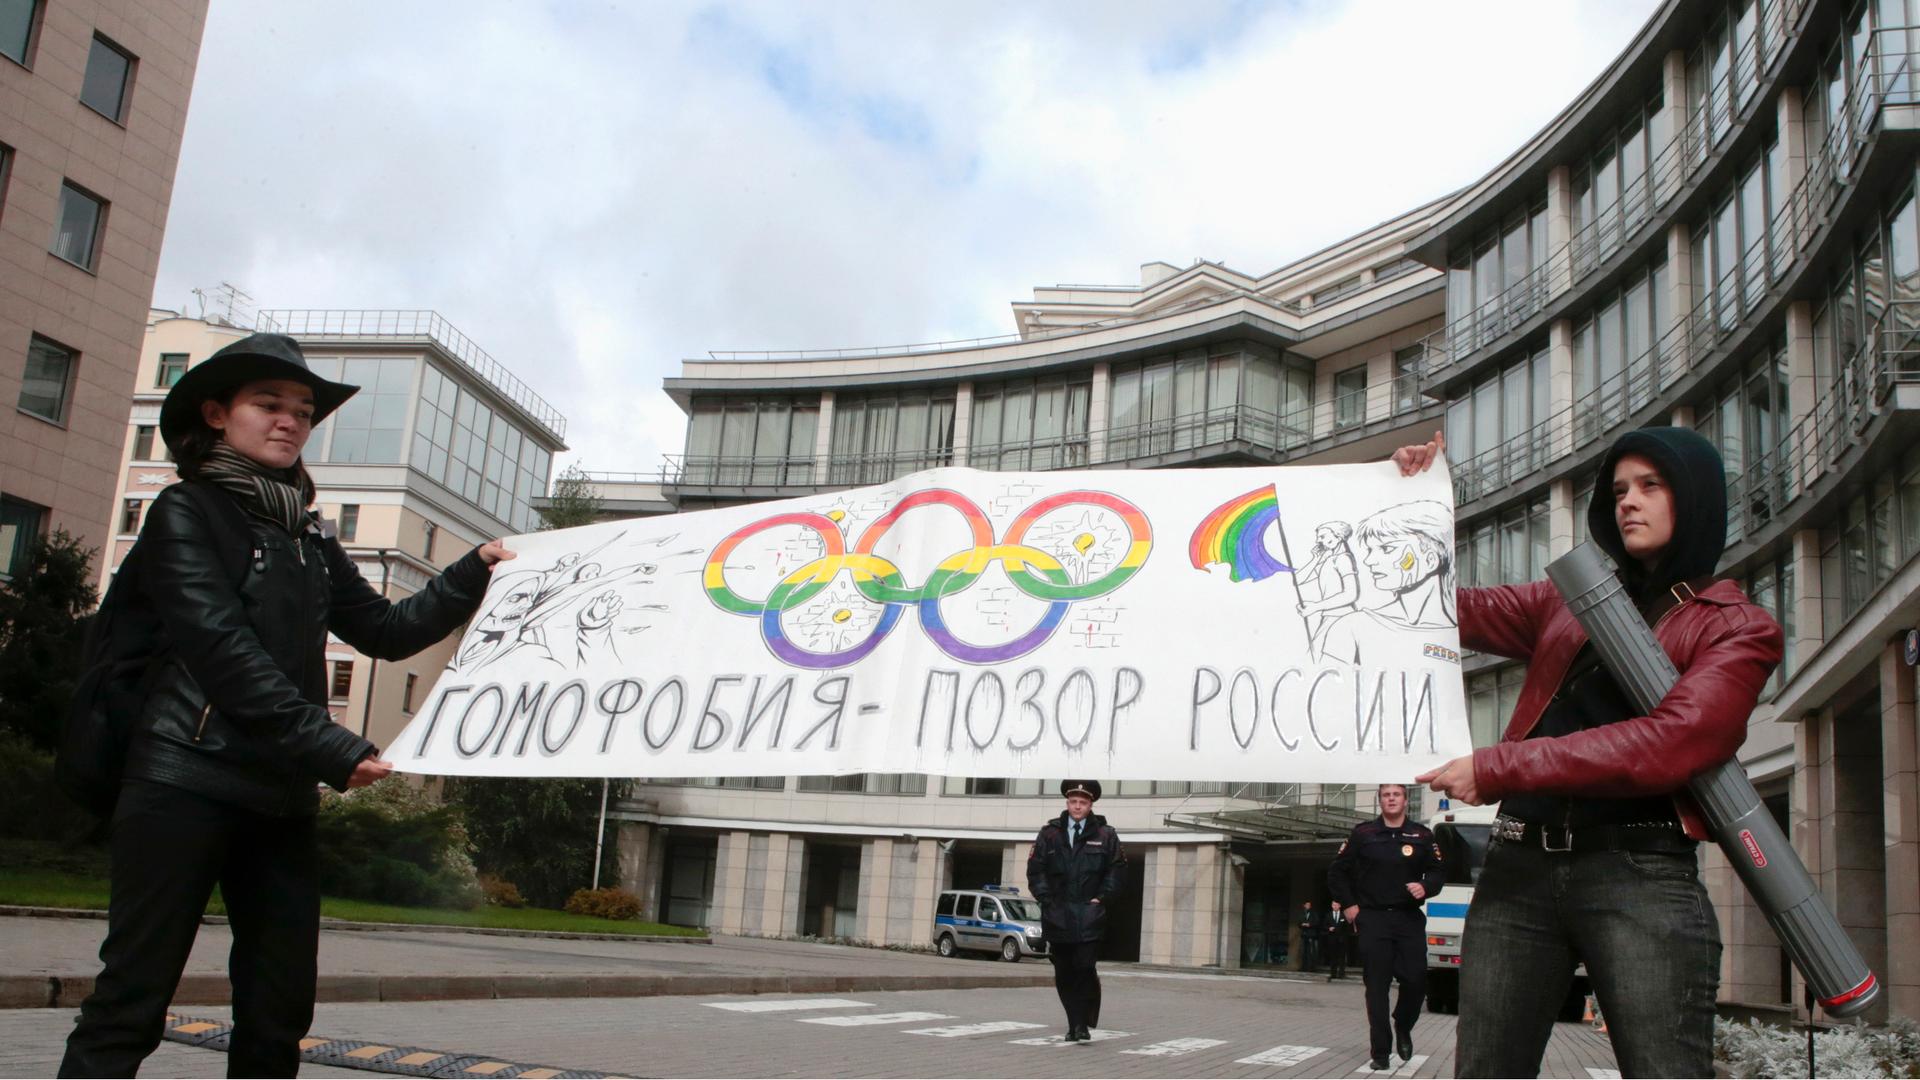 Gay rights activists in Moscow held a banner that reads "Homophobia is the shame of Russia," as they protested in front of the Sochi 2014 organizing committee building in Moscow on September 25, 2013.